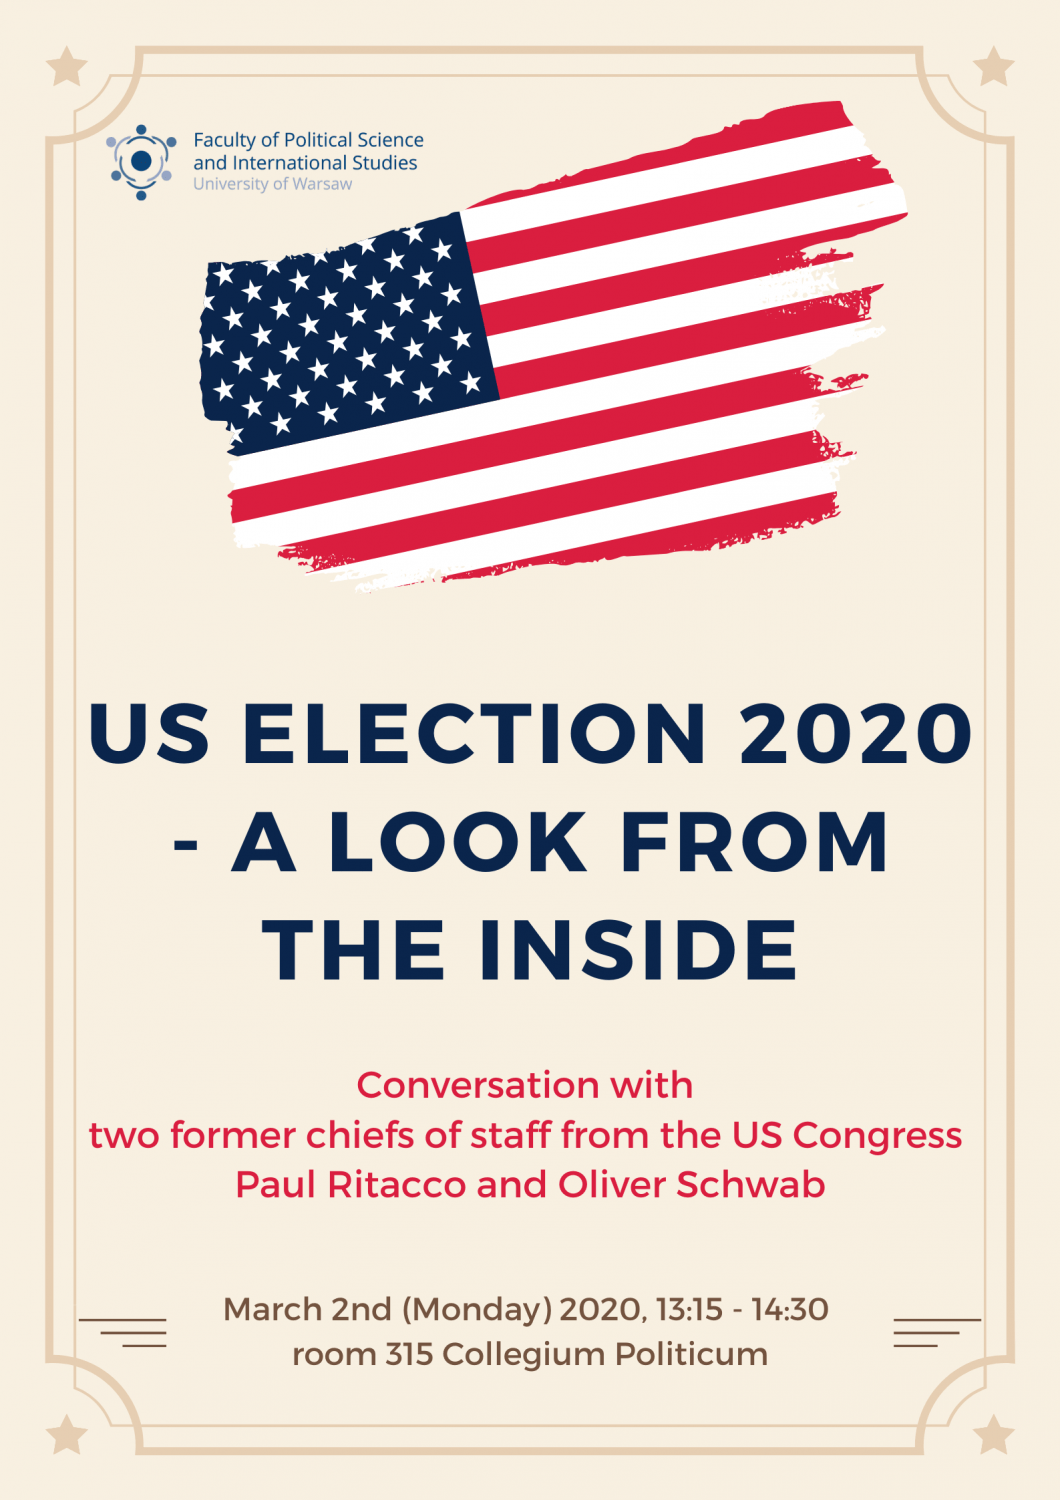 US ELECTION 2020 - a look from the inside - conversation